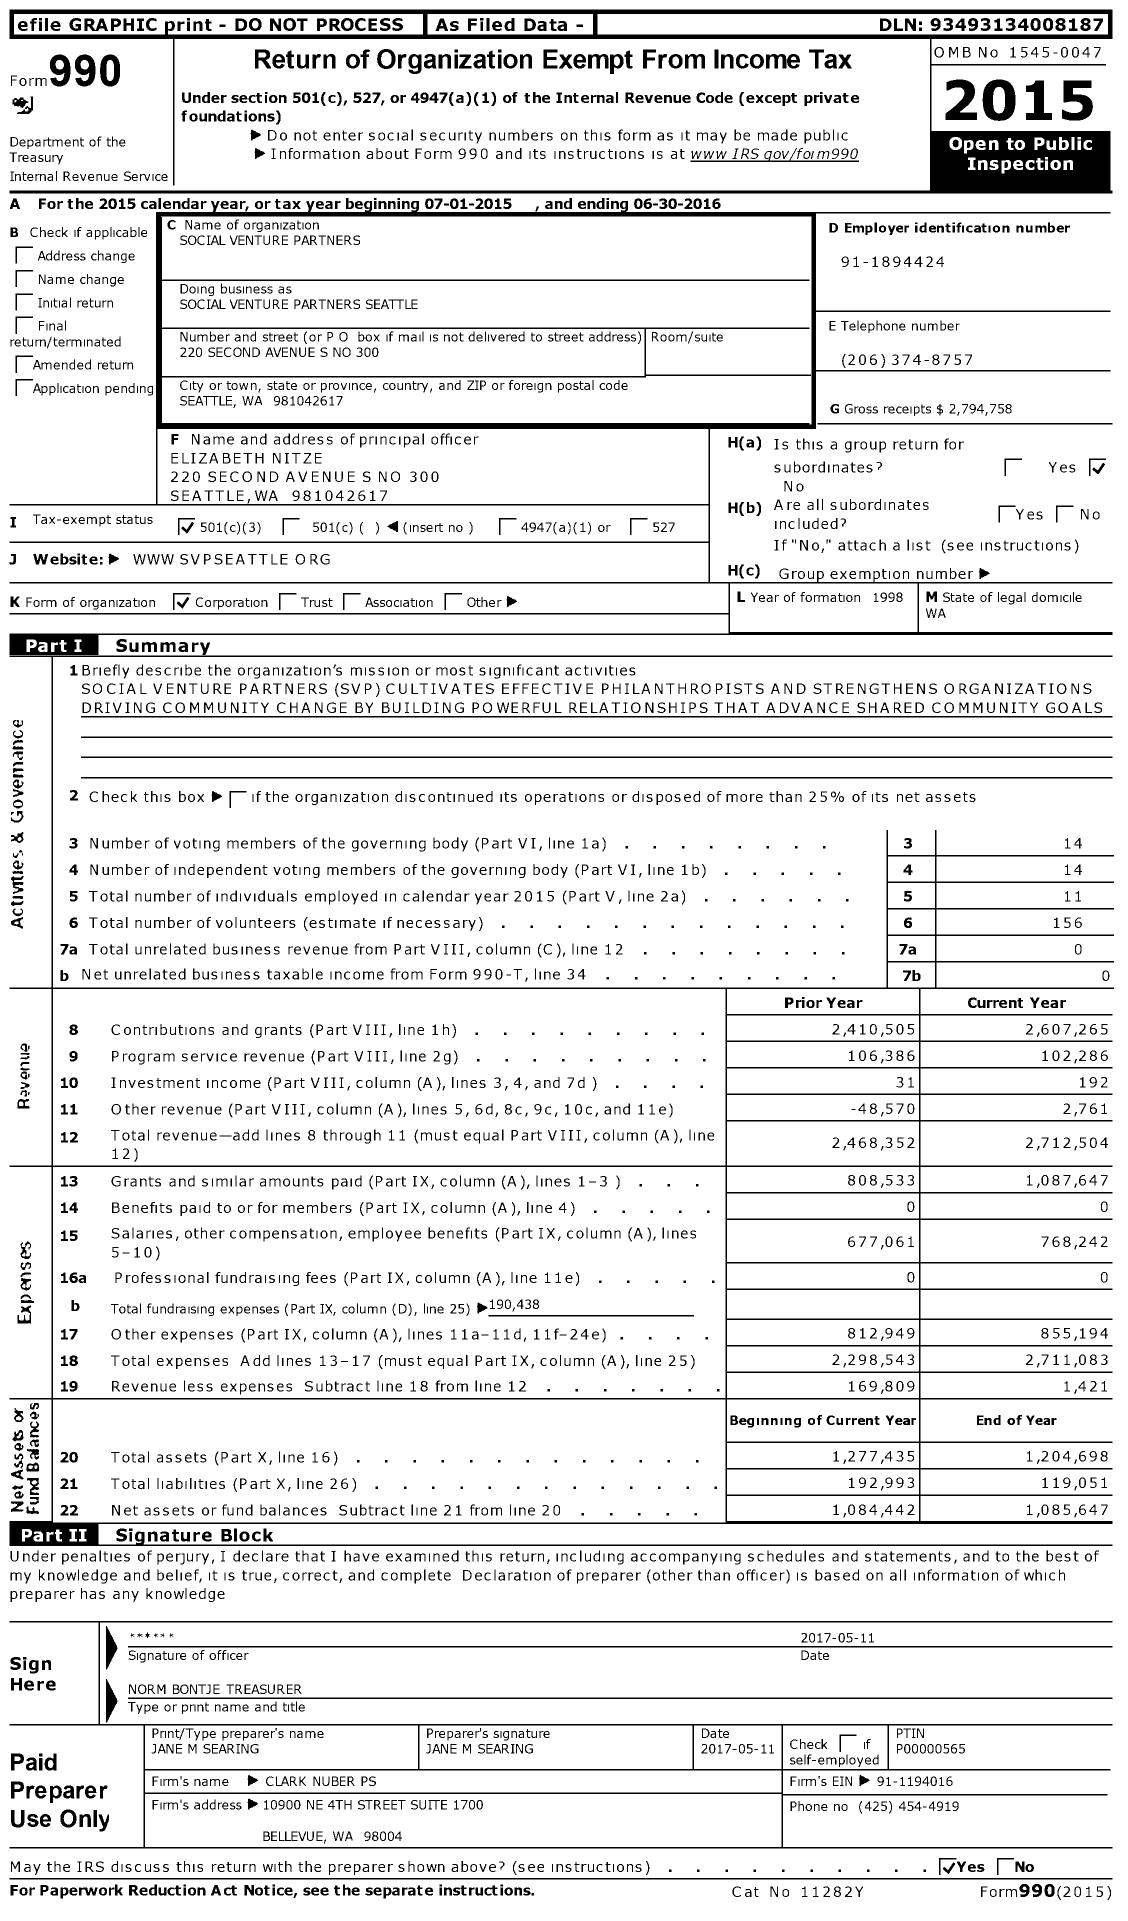 Image of first page of 2015 Form 990 for Social Venture Partners Seattle (SVP)